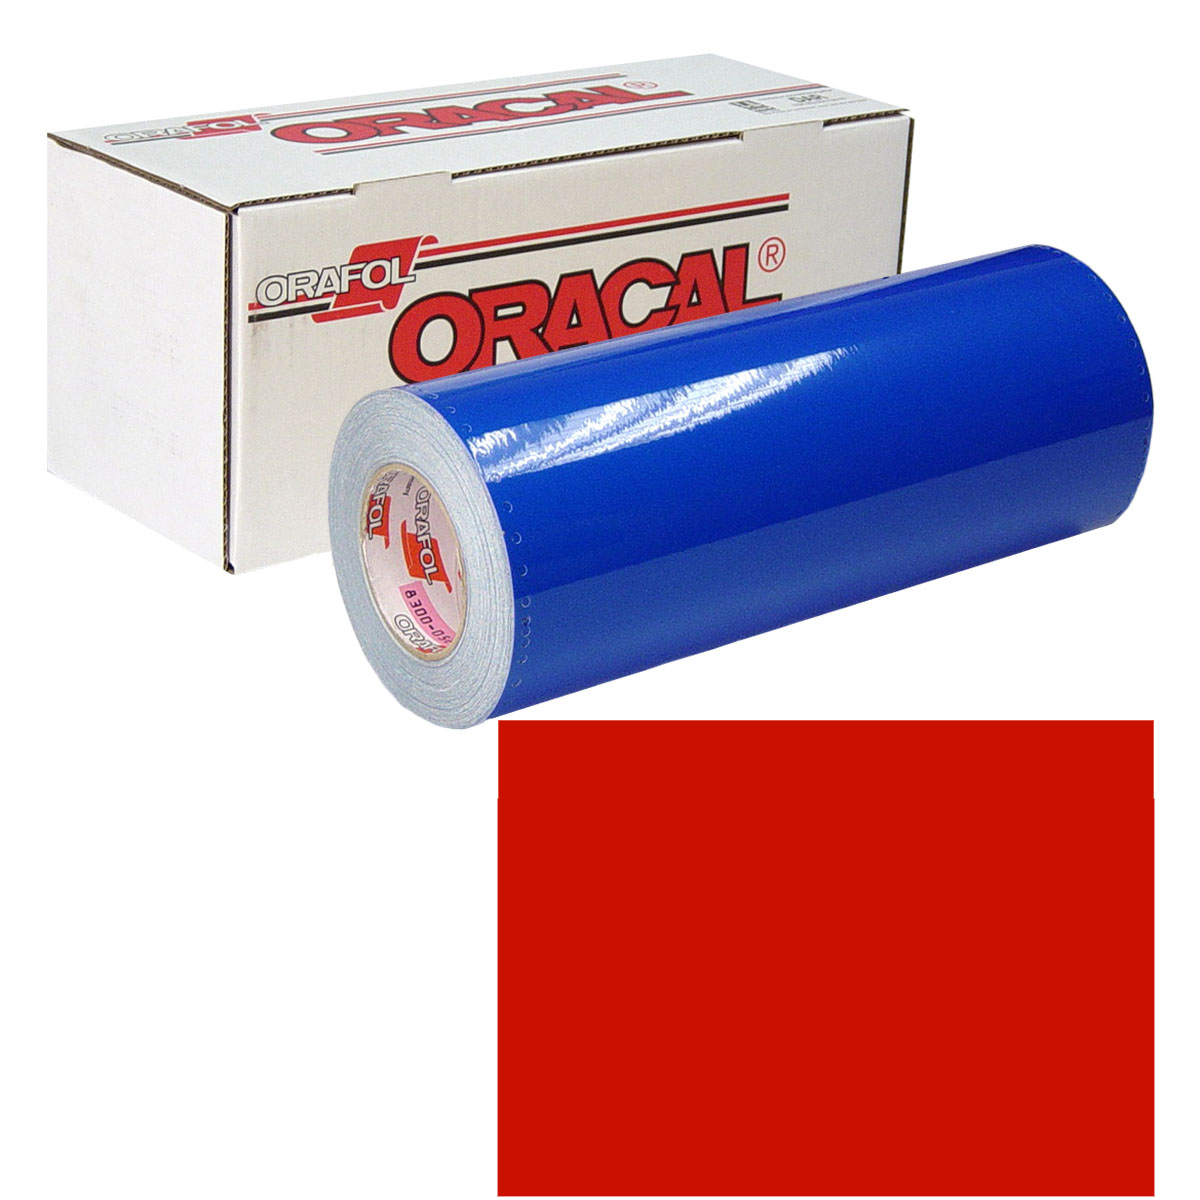 ORACAL 631 30in X 50yd 032 Light Red